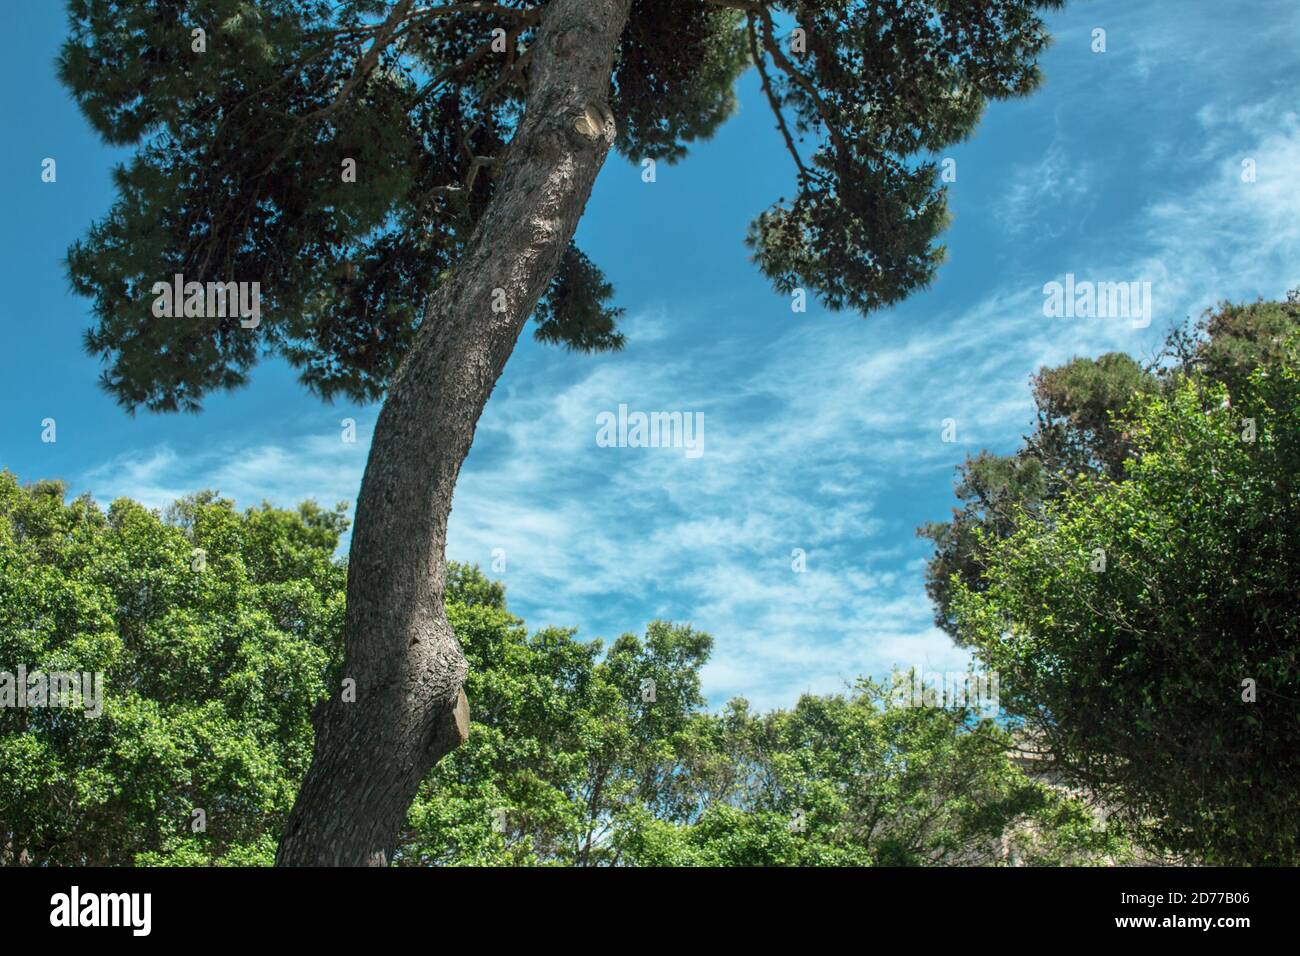 a majestic domestic pine stands out against a sky speckled with clouds, in the background other bright green foliage of trees Stock Photo